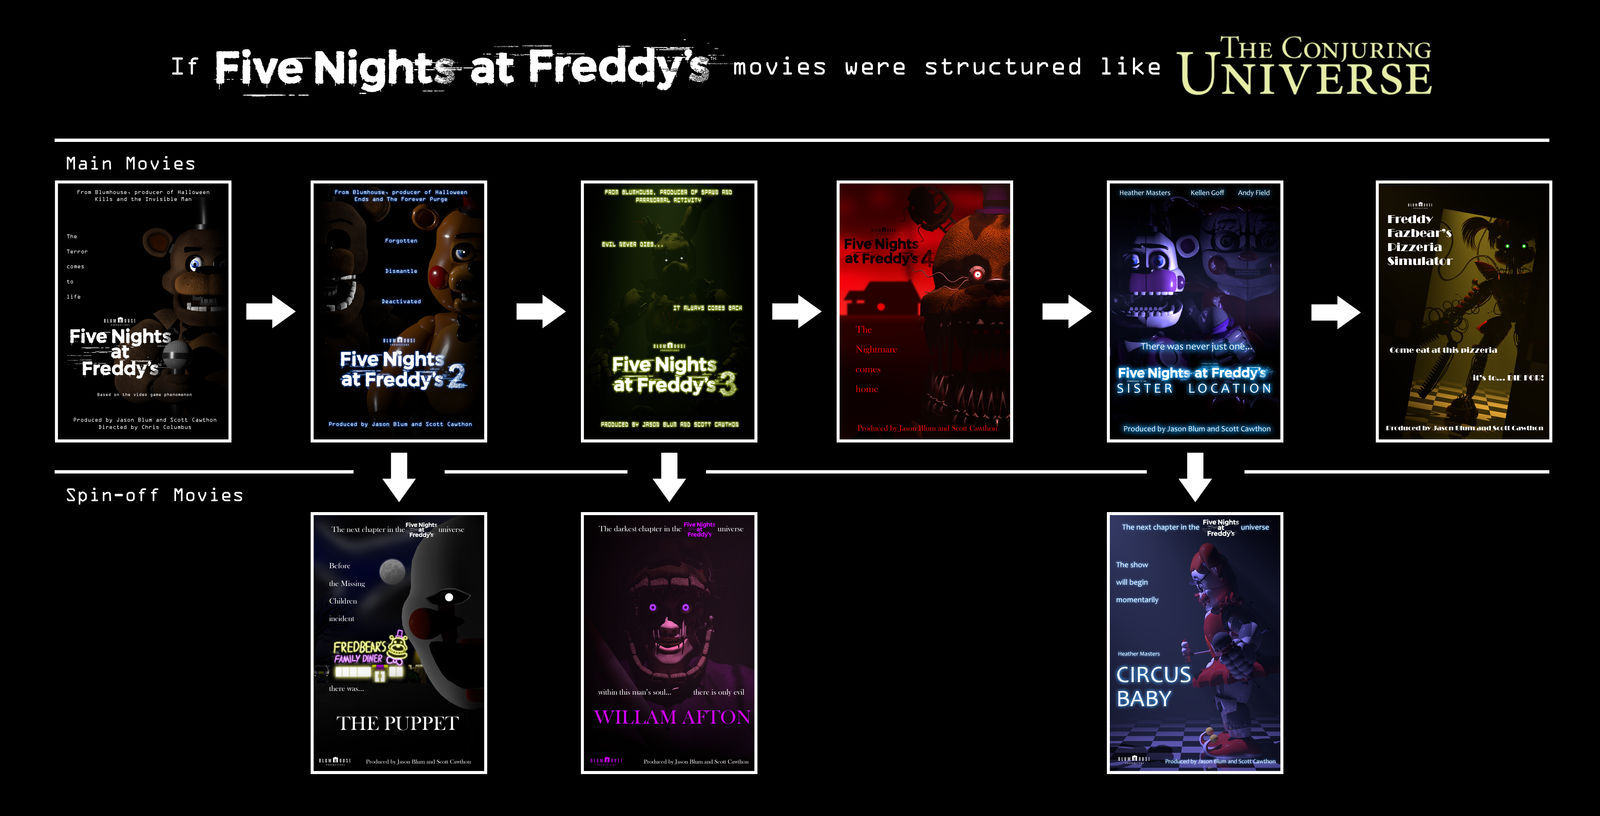 FNAF THEORIES (The Expanded Universe of the Five Nights At